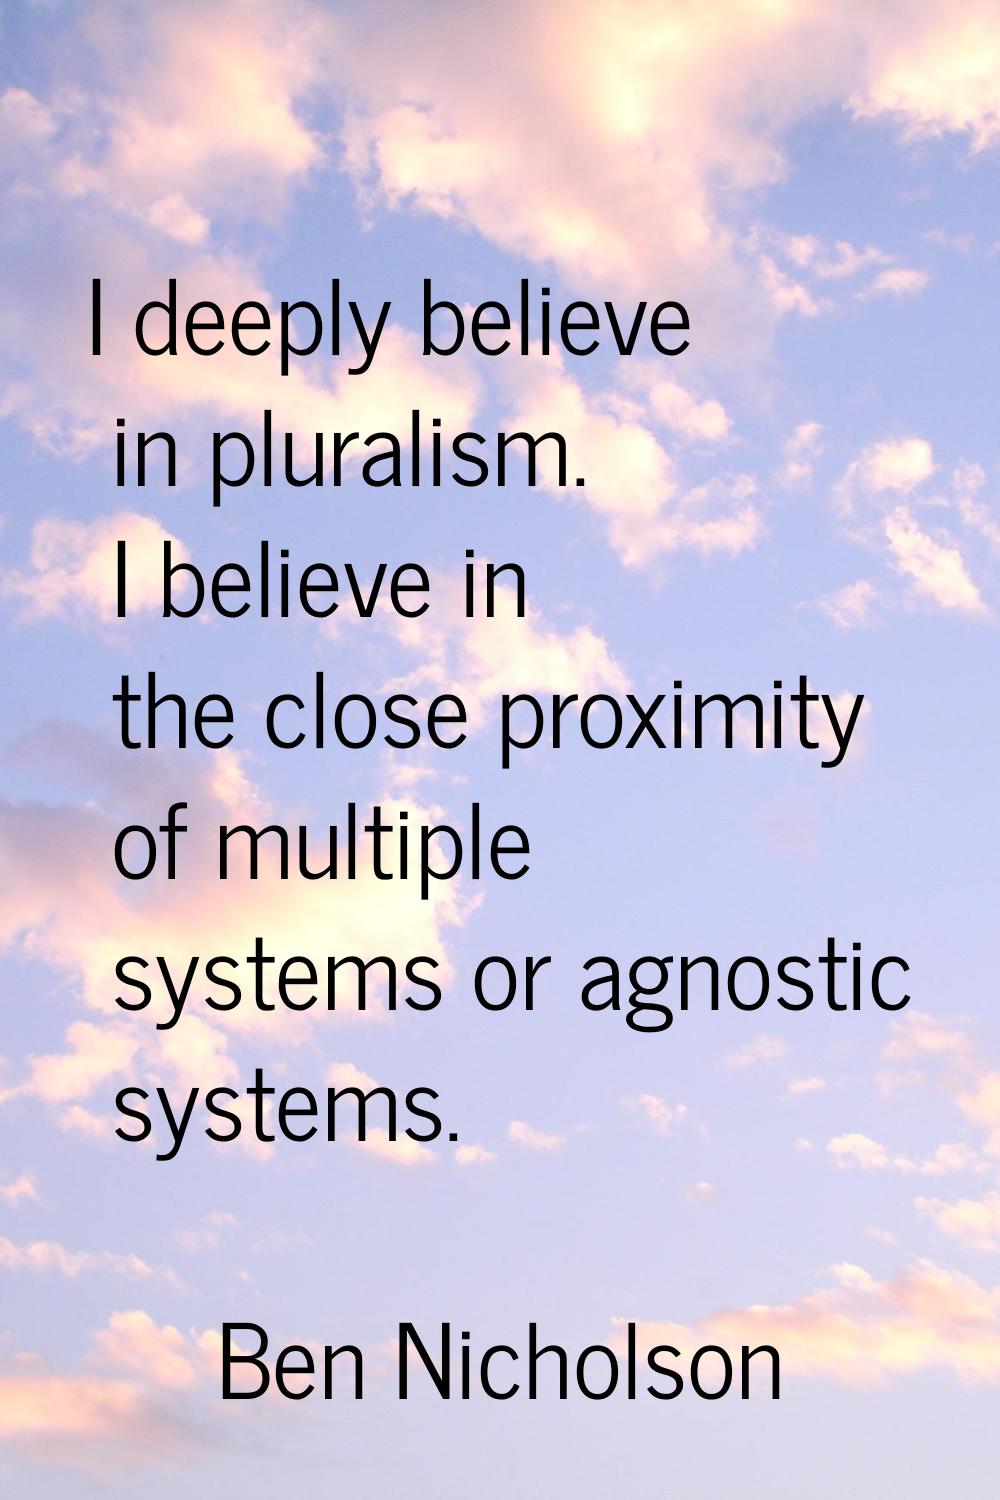 I deeply believe in pluralism. I believe in the close proximity of multiple systems or agnostic sys